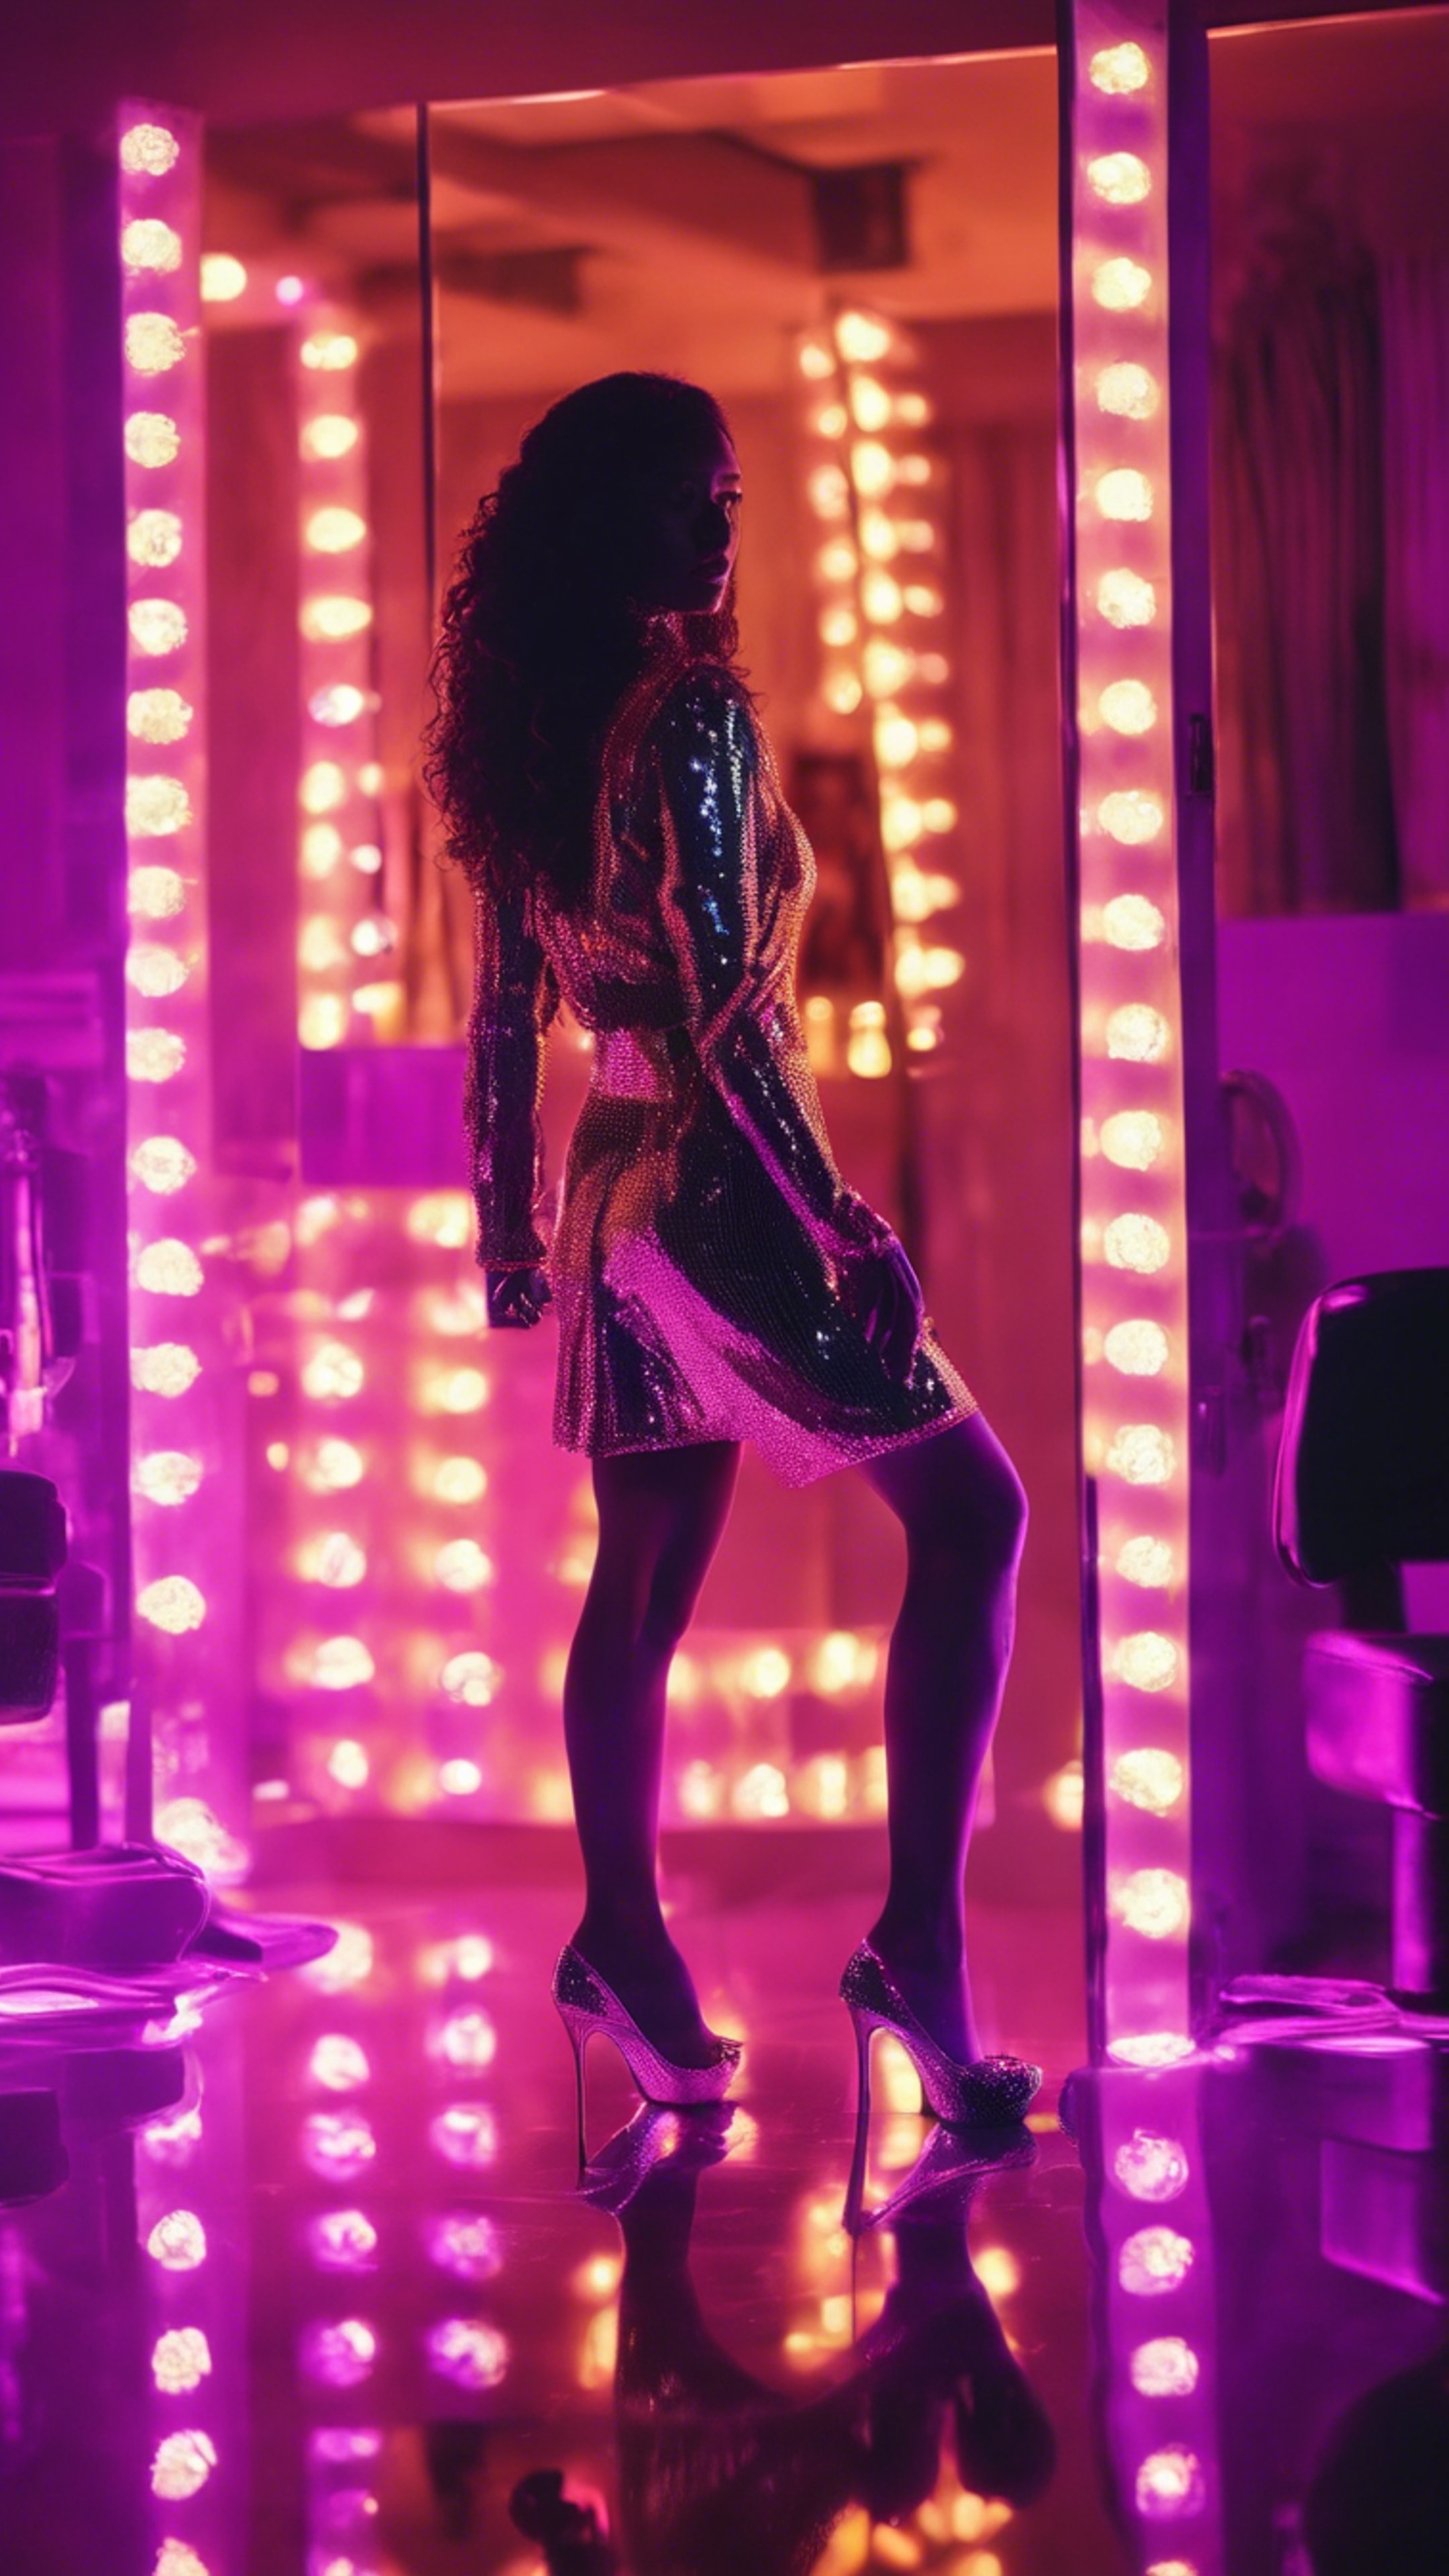 A confident baddie in a neon-lit room, dressed in sequins and high heels, her silhouette reflecting in the mirror. Tapet[dd190a8a8fd944b882f7]